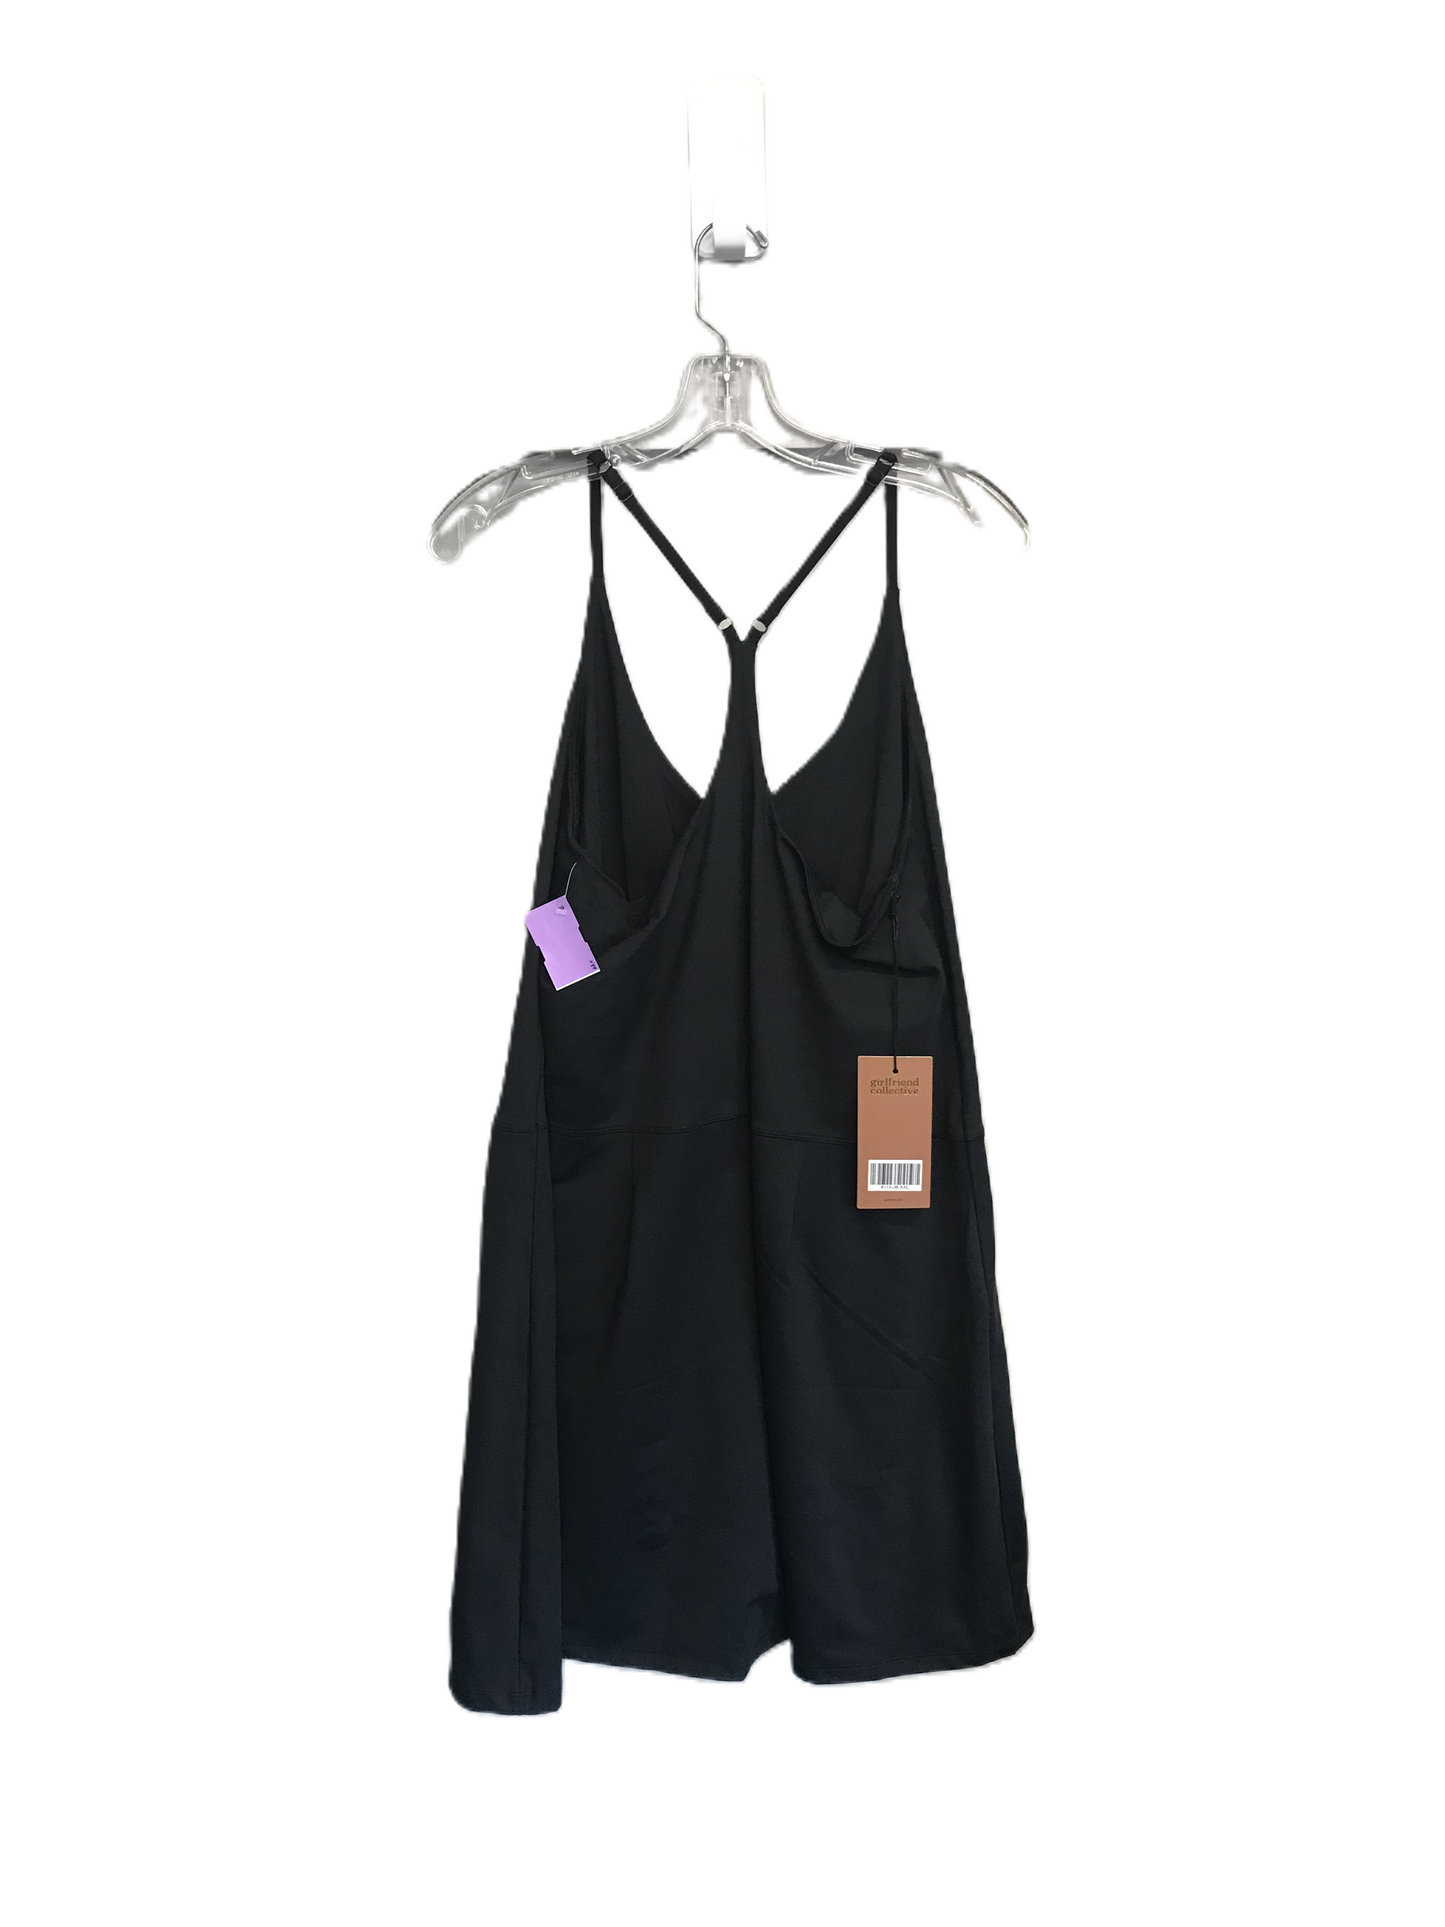 Black Athletic Dress By Girlfriend Collective Size: 1x